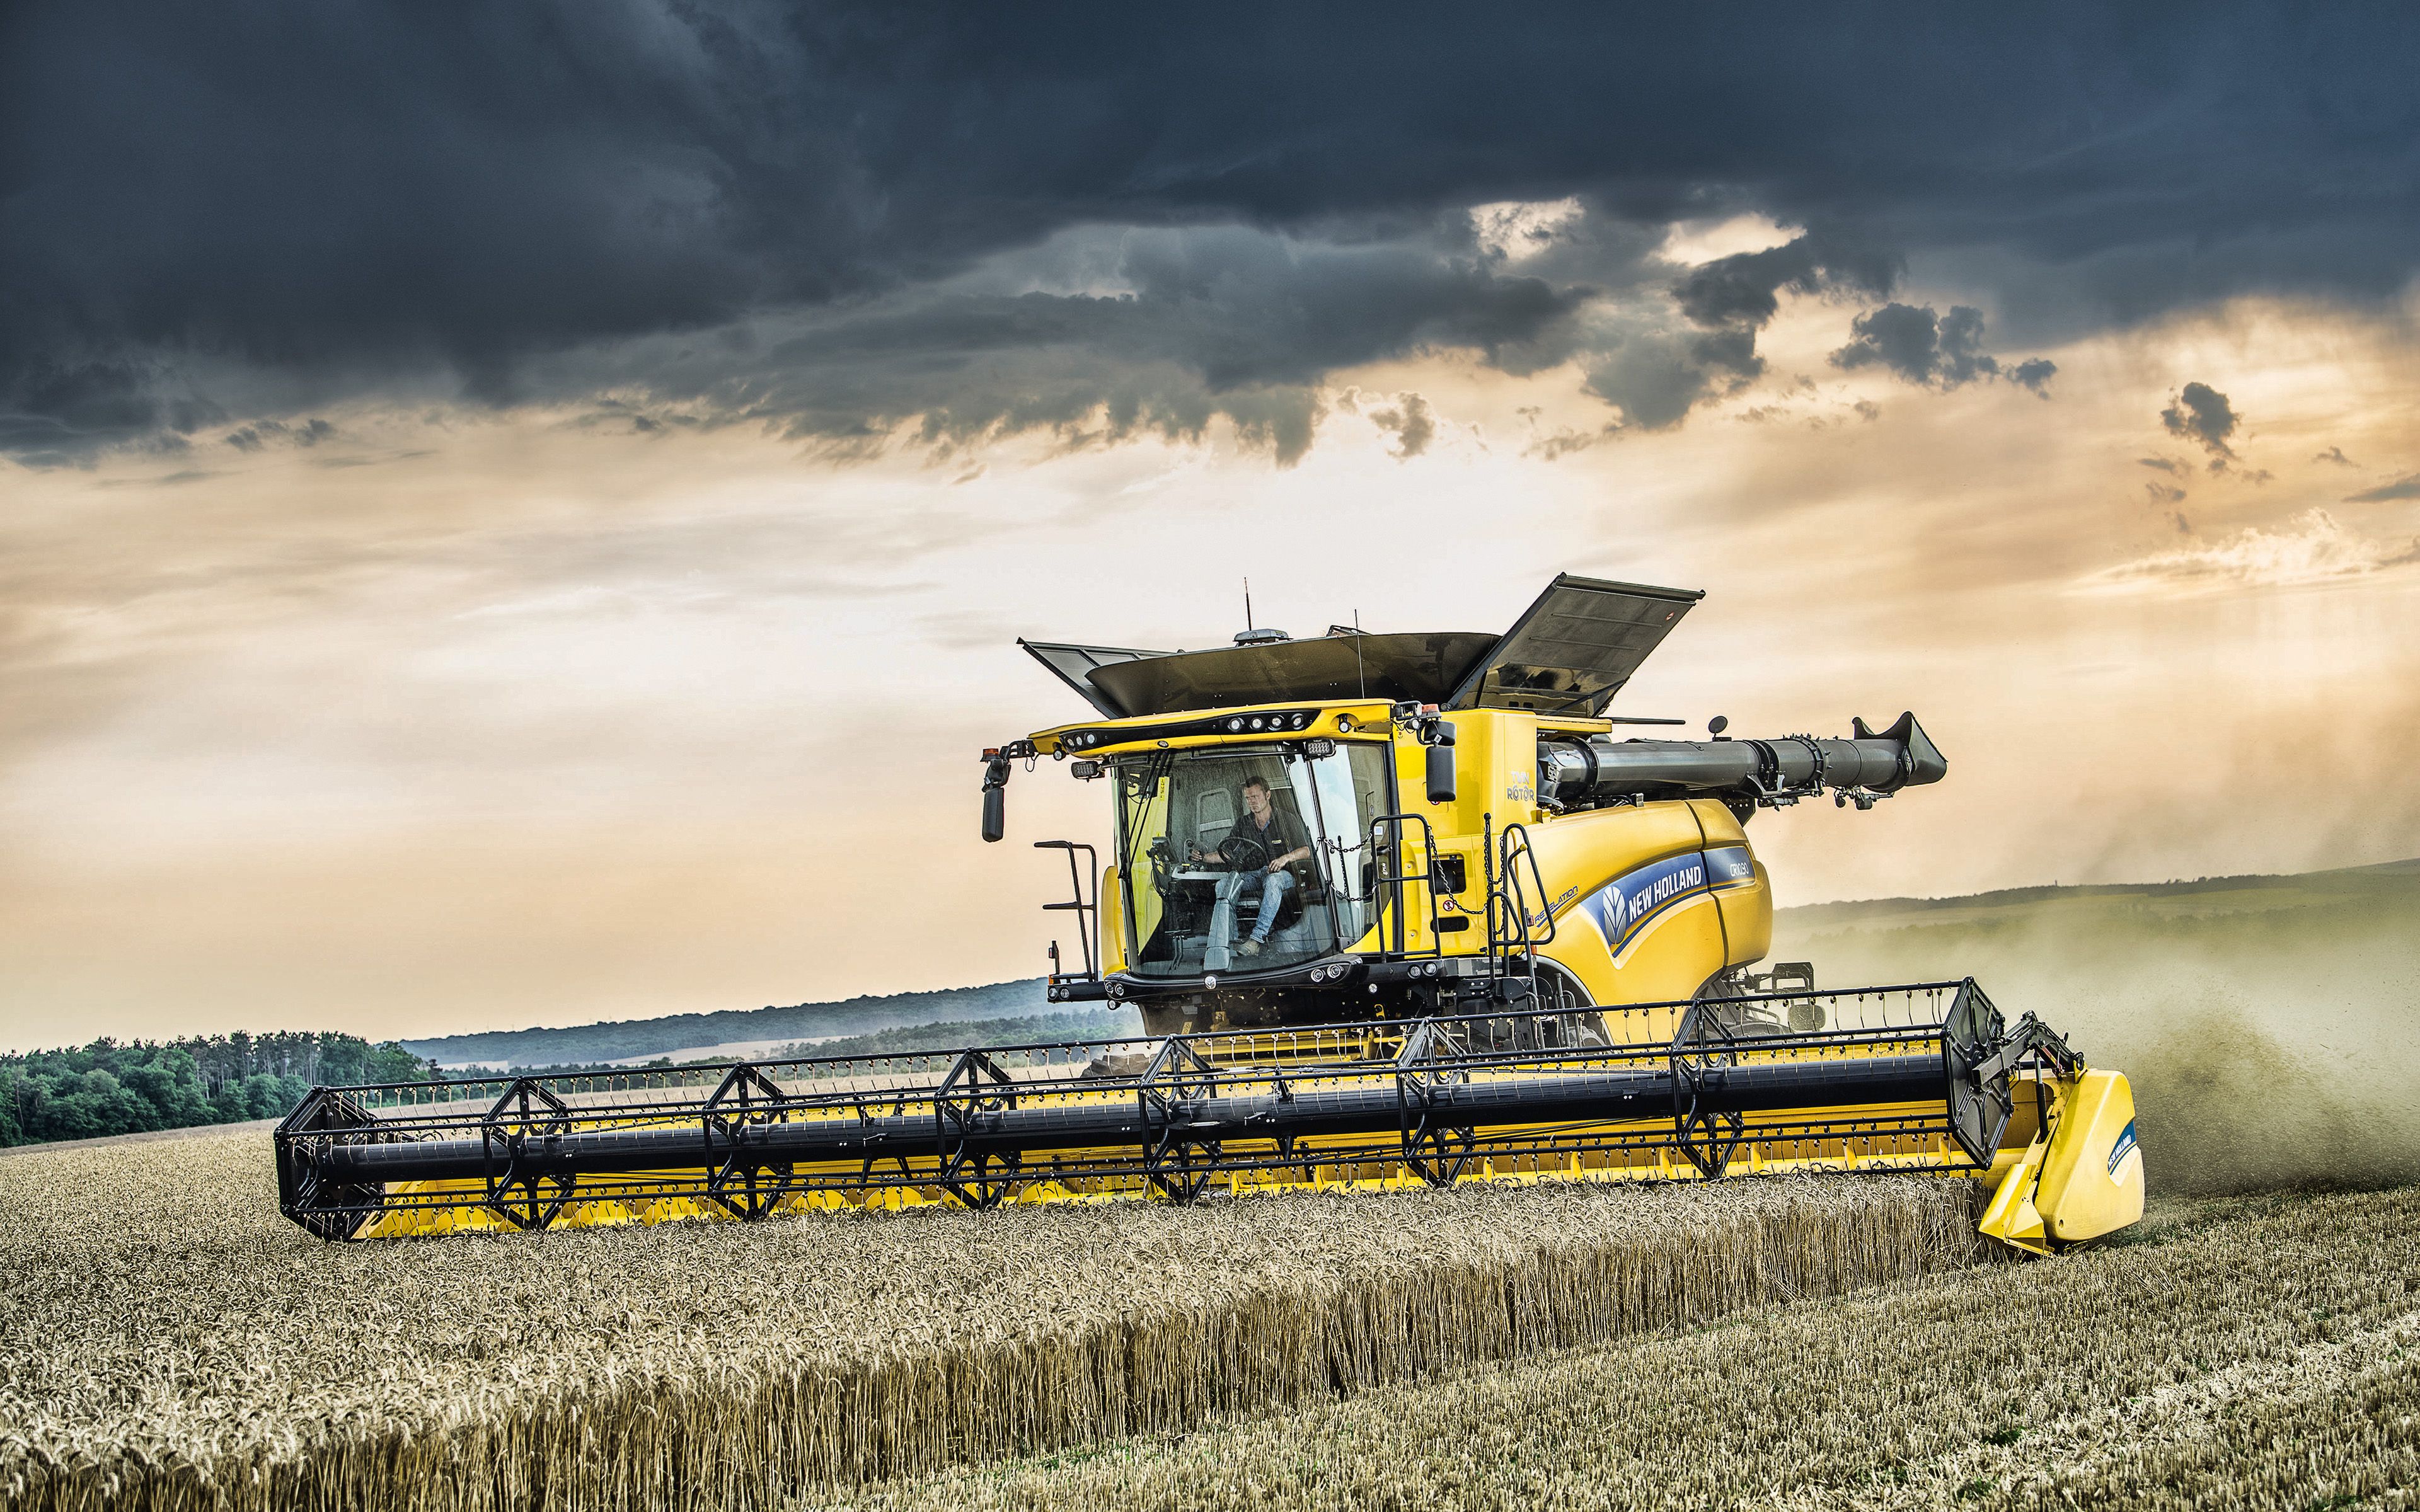 Download wallpaper New Holland CR 4k, wheat harvest, 2019 combines, agricultural machinery, HDR, grain harvesting, combine harvester, Combine in the field, agriculture, New Holland Agriculture for desktop with resolution 3840x2400. High Quality